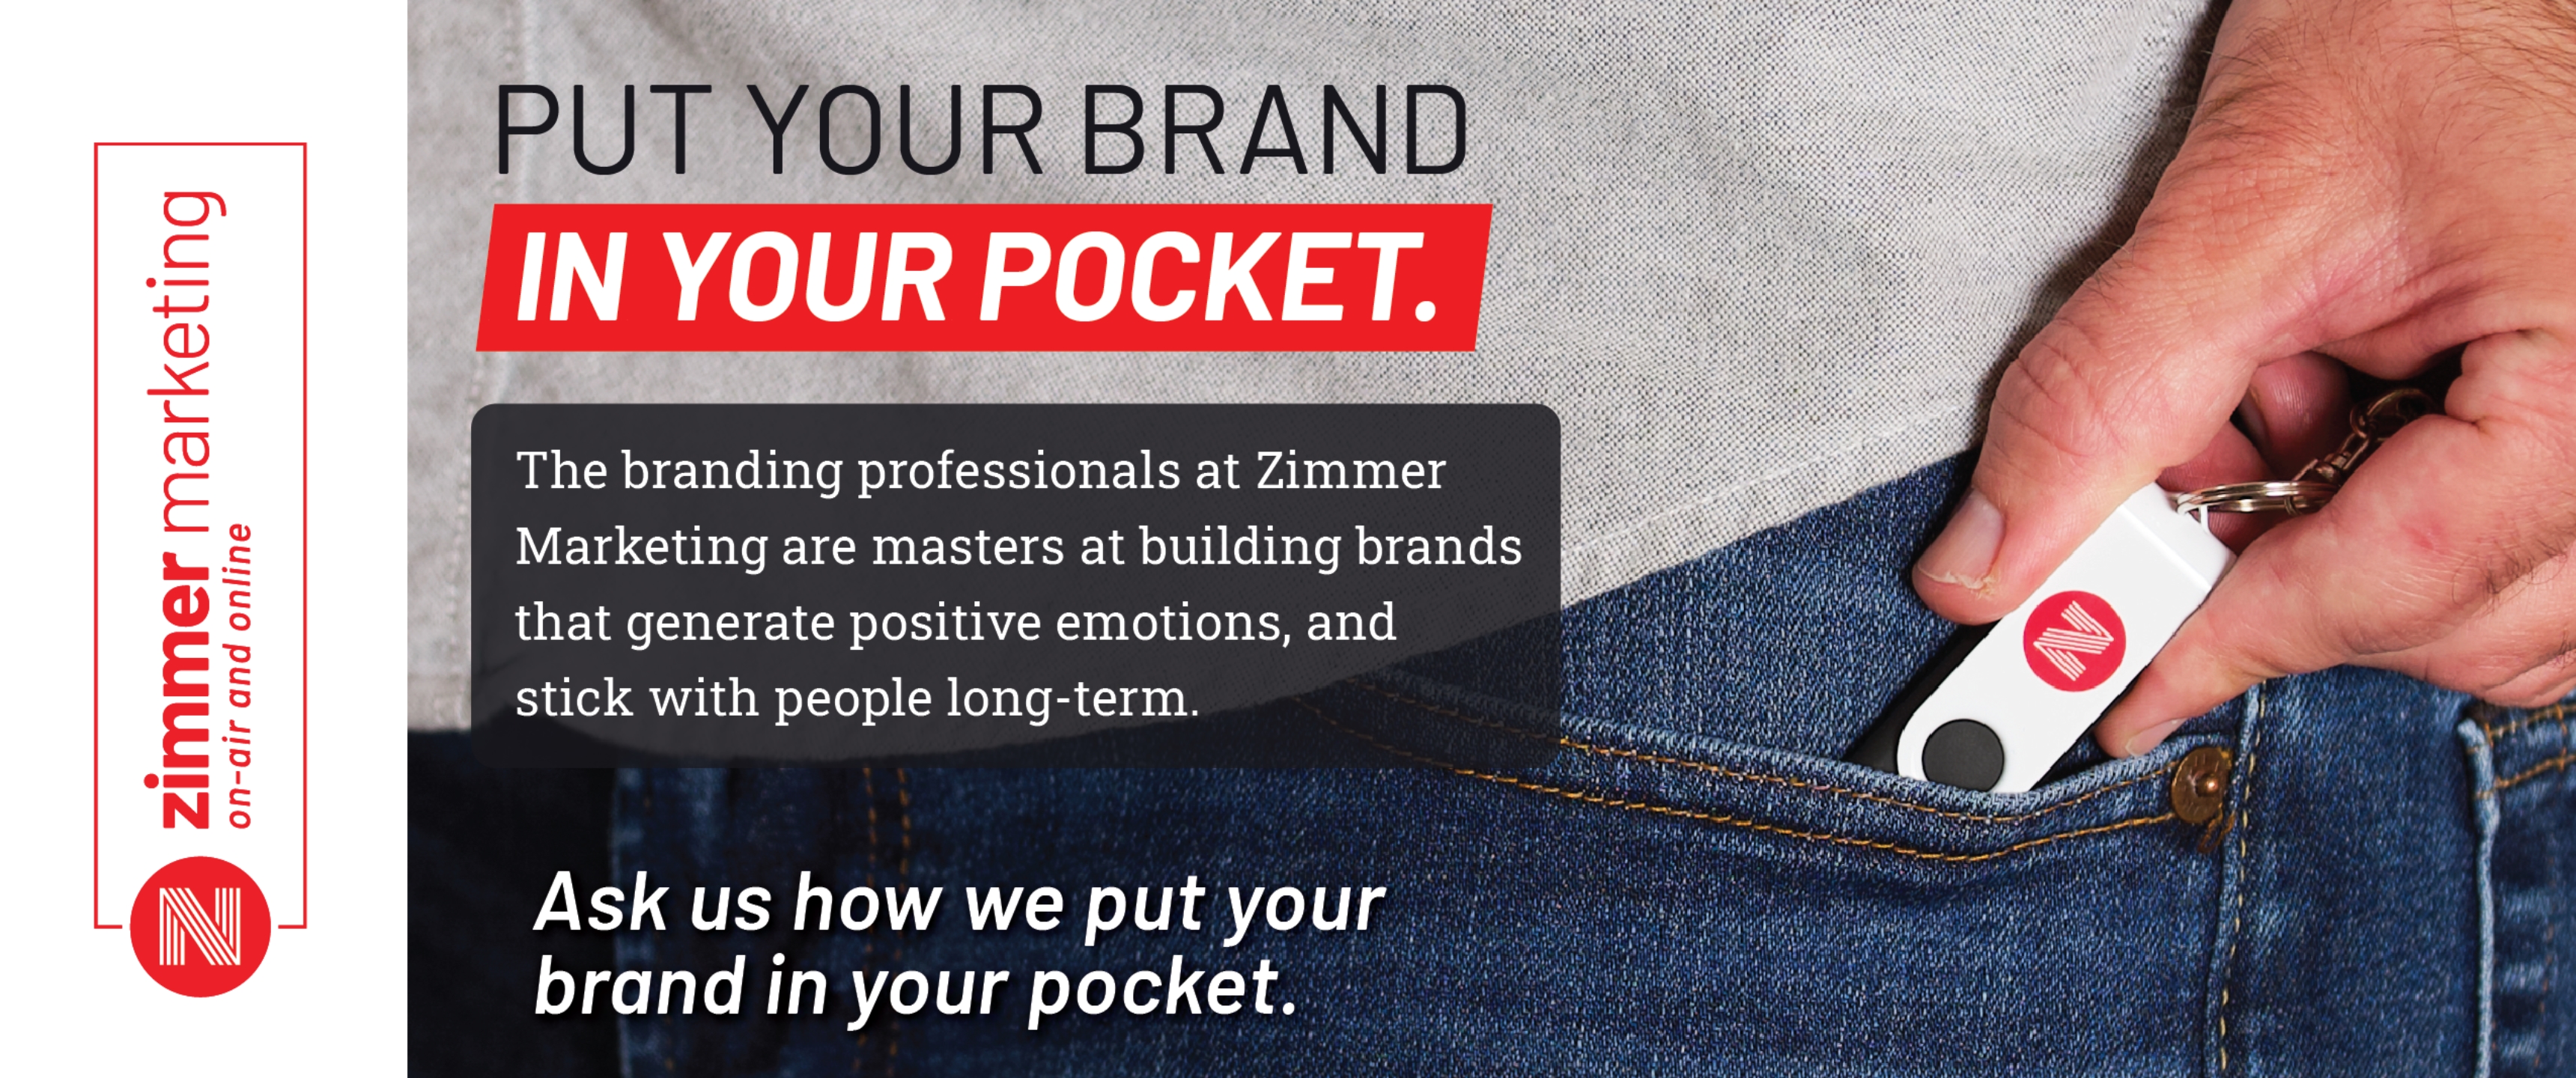 Zimmer Marketing Put Your Brand in Your Pocket